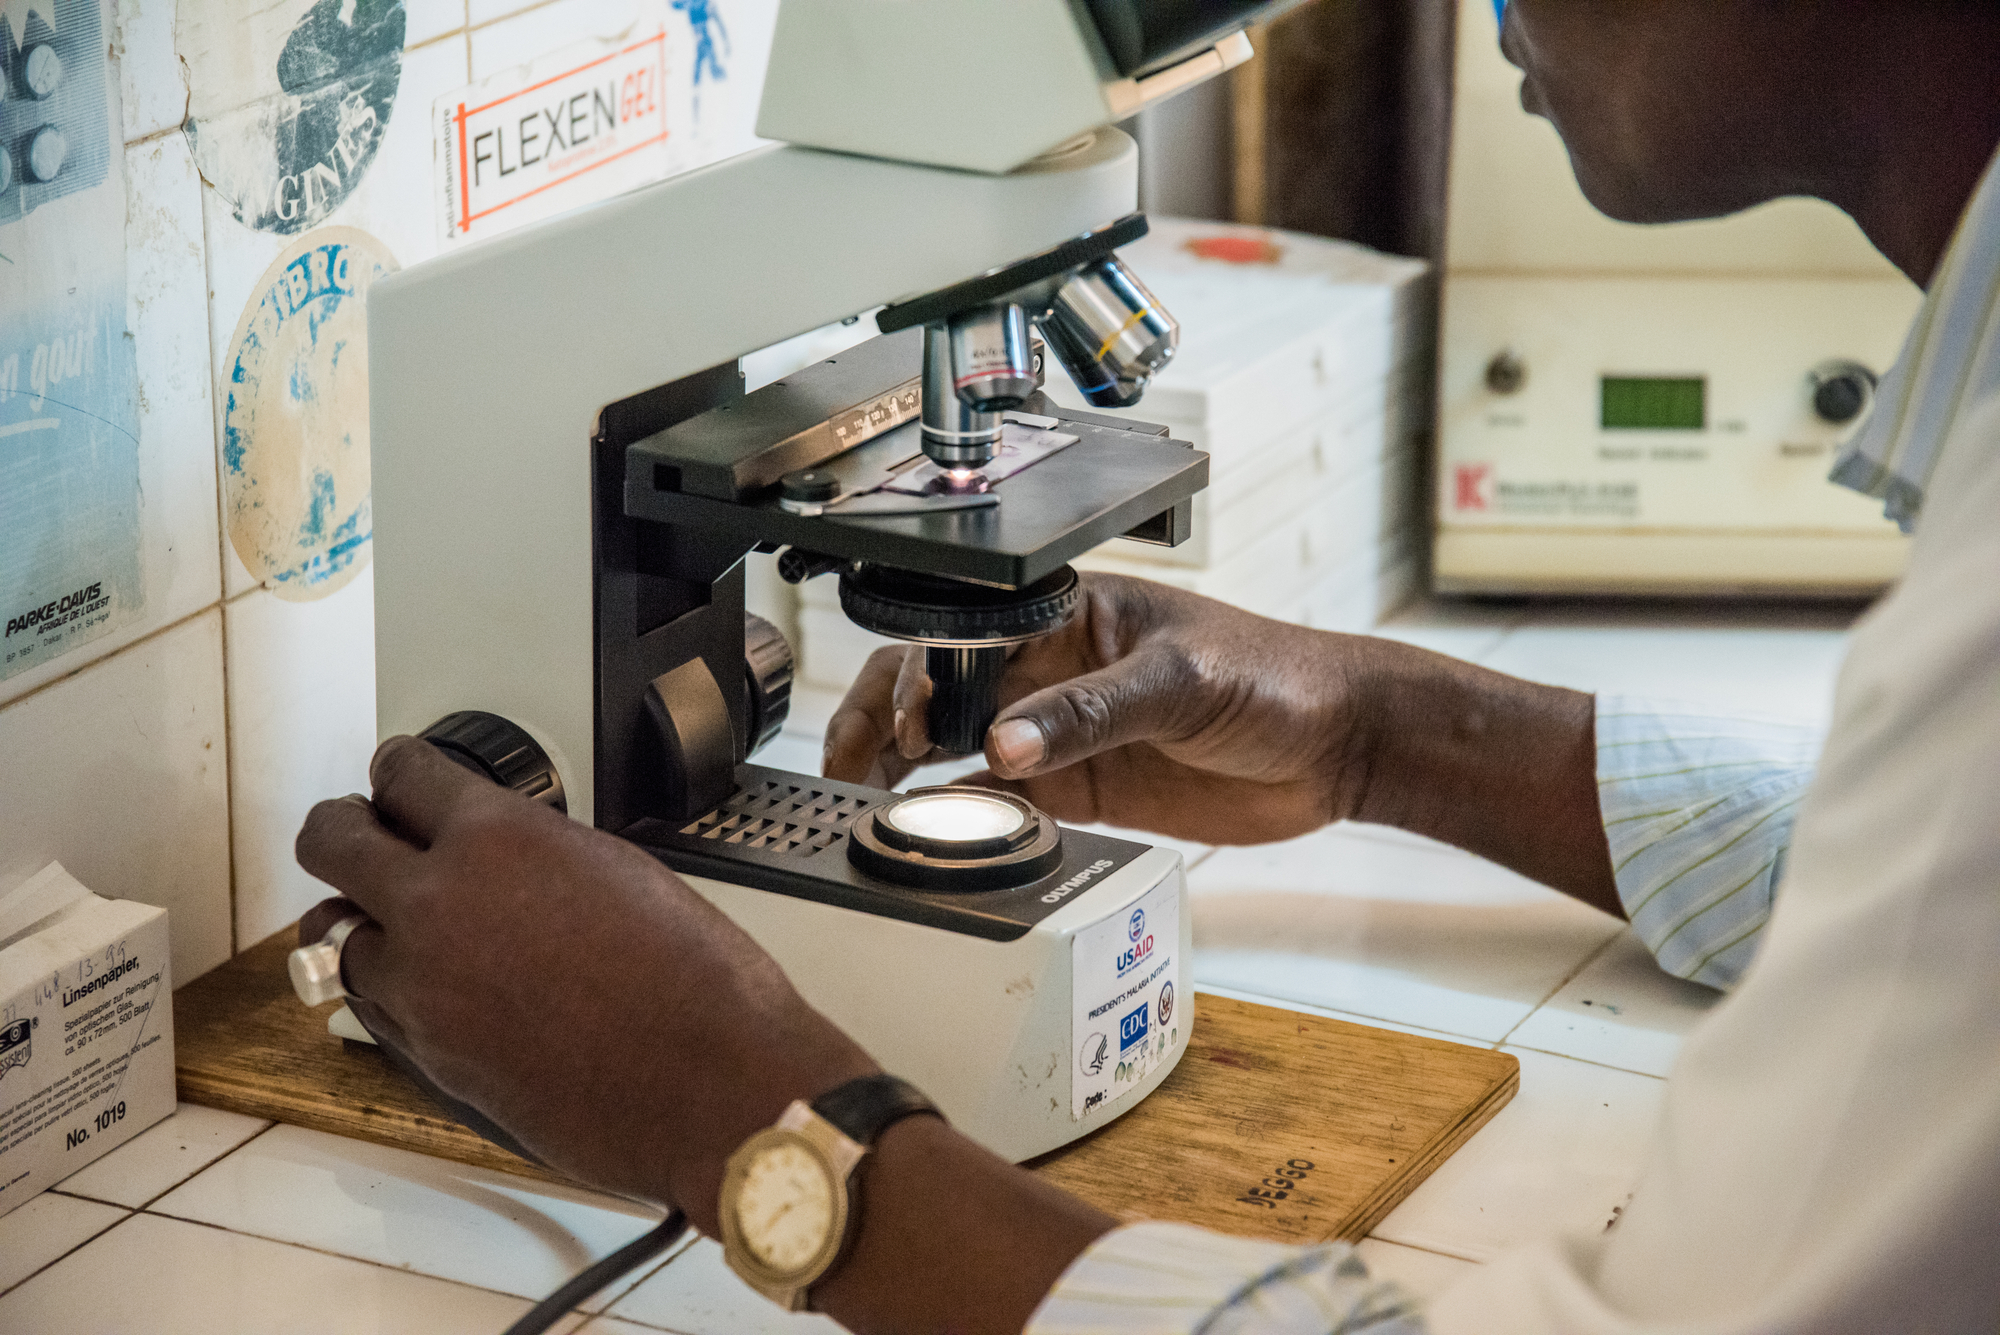 A medical staff member looks through a microscope to detect a blood sample if positive for malaria at the Deggo Health Centre in Pekine, Dakar, Senegal on March 13, 2017. The impact committee of the Lives and Livelihoods Fund (LLF) visited the center to learn more about the fight against malaria. 